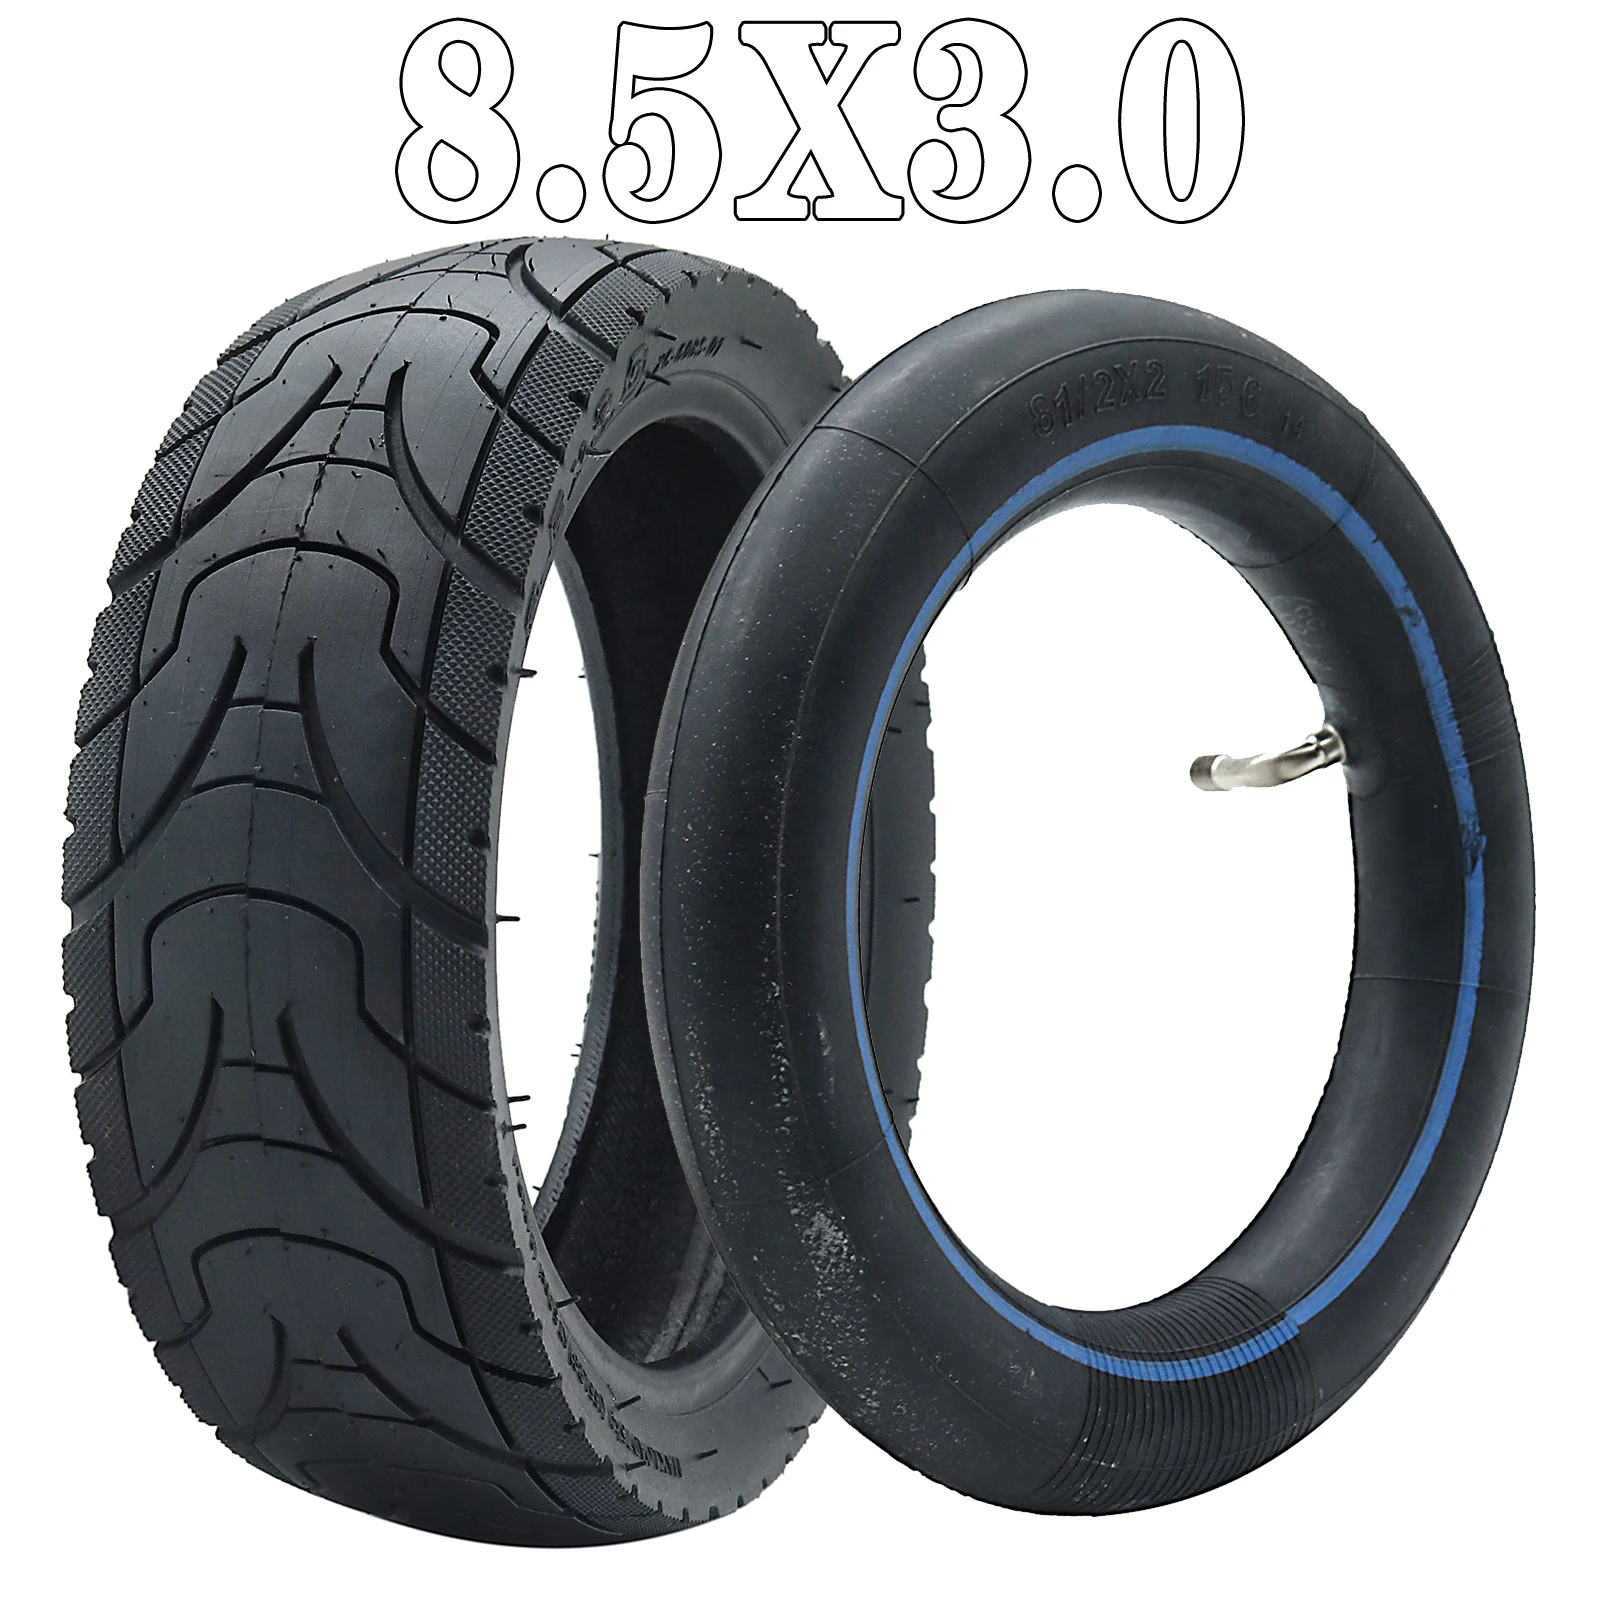 

8.5x3.0 Tyre for XiaoMi M365/1S Pro Series Dualtron Mini Electric Scooter Pneumatic Wheel 81/2x3 0 Widened Tire